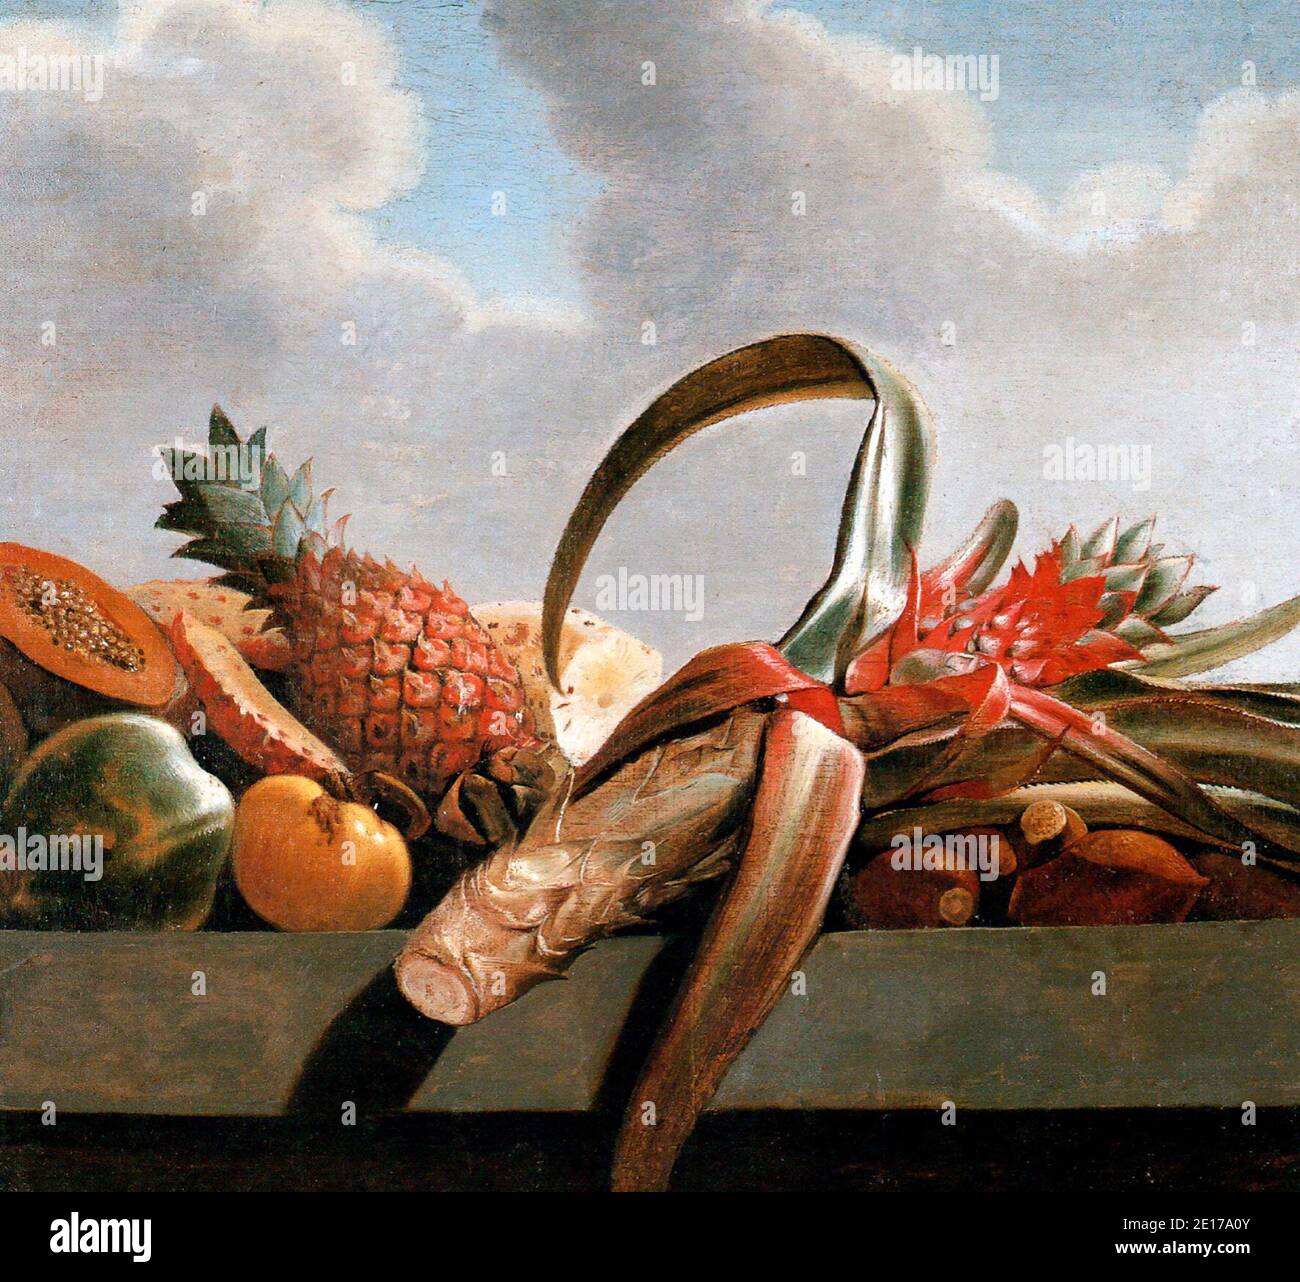 Pineapple, papaya, and other fruits - Albert Eckhout, 1600s Stock Photo